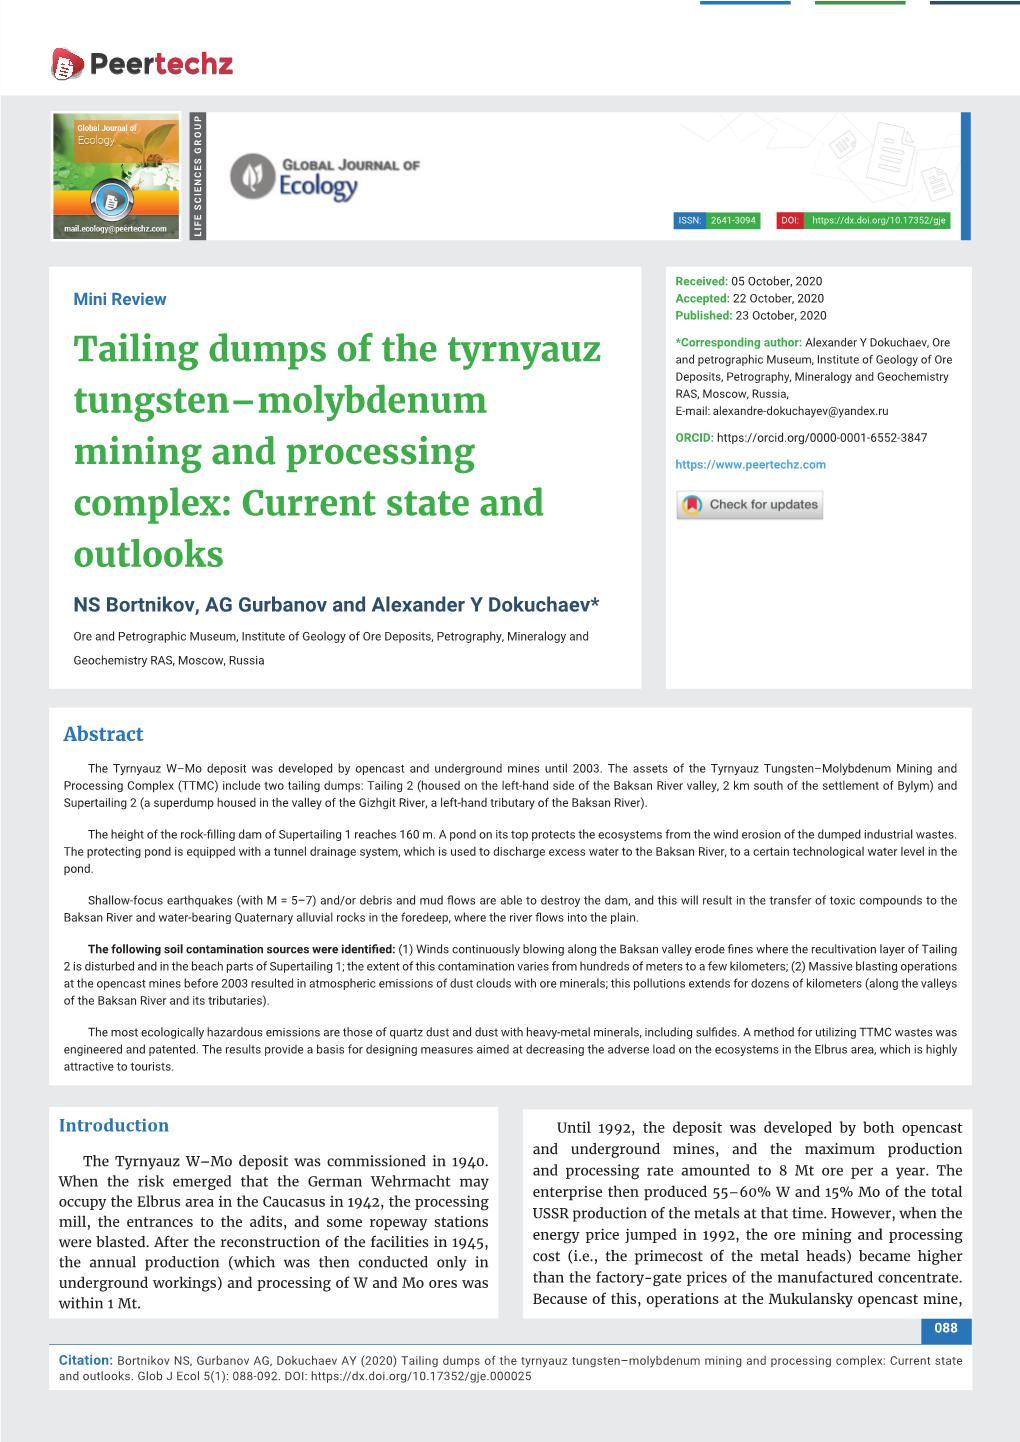 Tailing Dumps of the Tyrnyauz Tungsten–Molybdenum Mining and Processing Complex: Current State and Outlooks